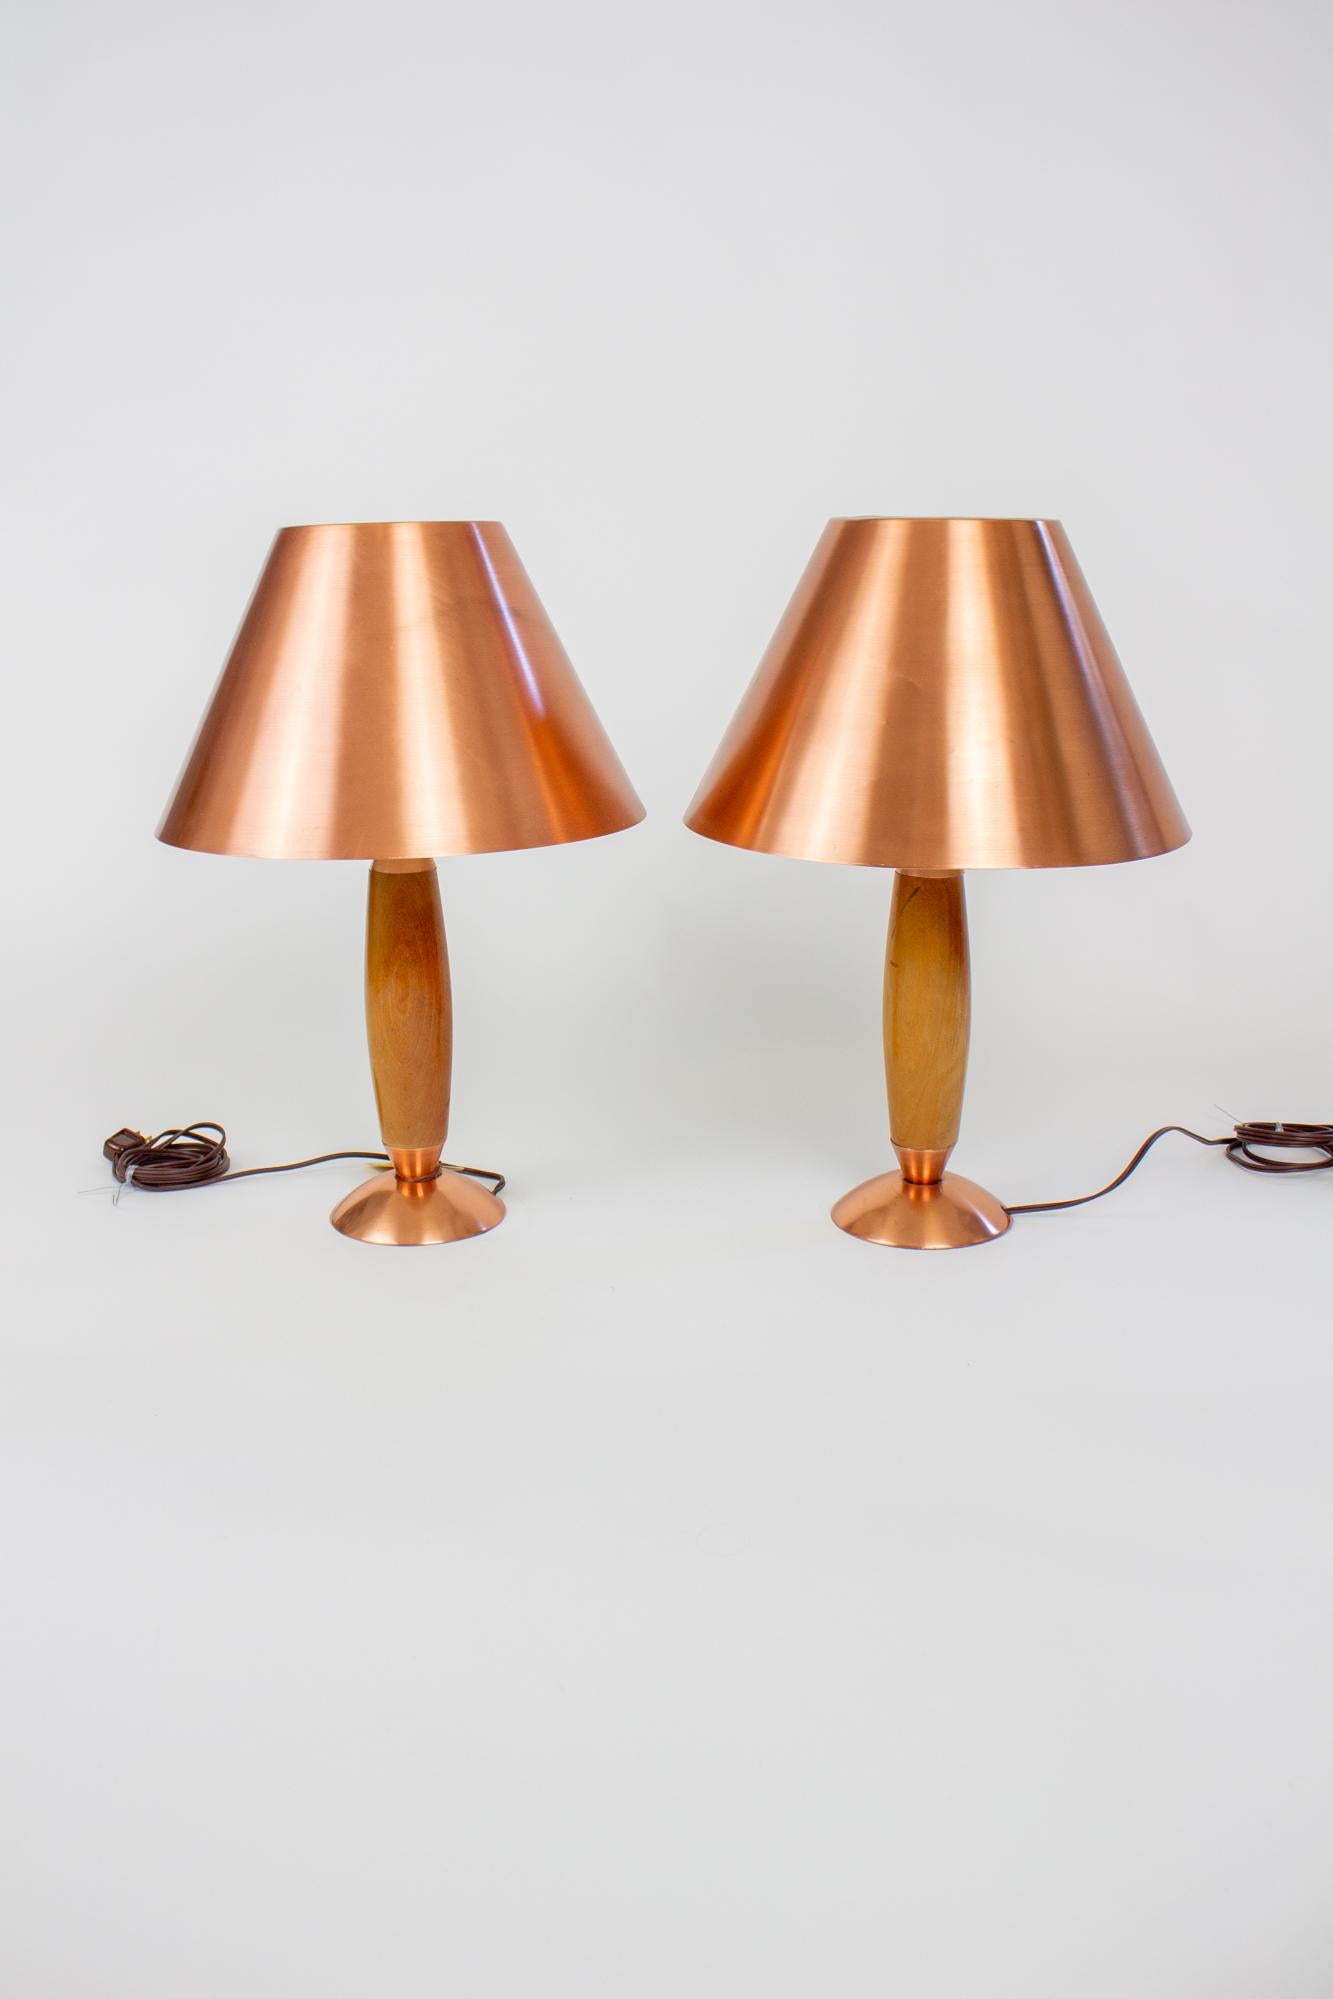 Mid-Century Modern Mid 20th Century Copper and Wood Masterline Table Lamps - a Pair For Sale